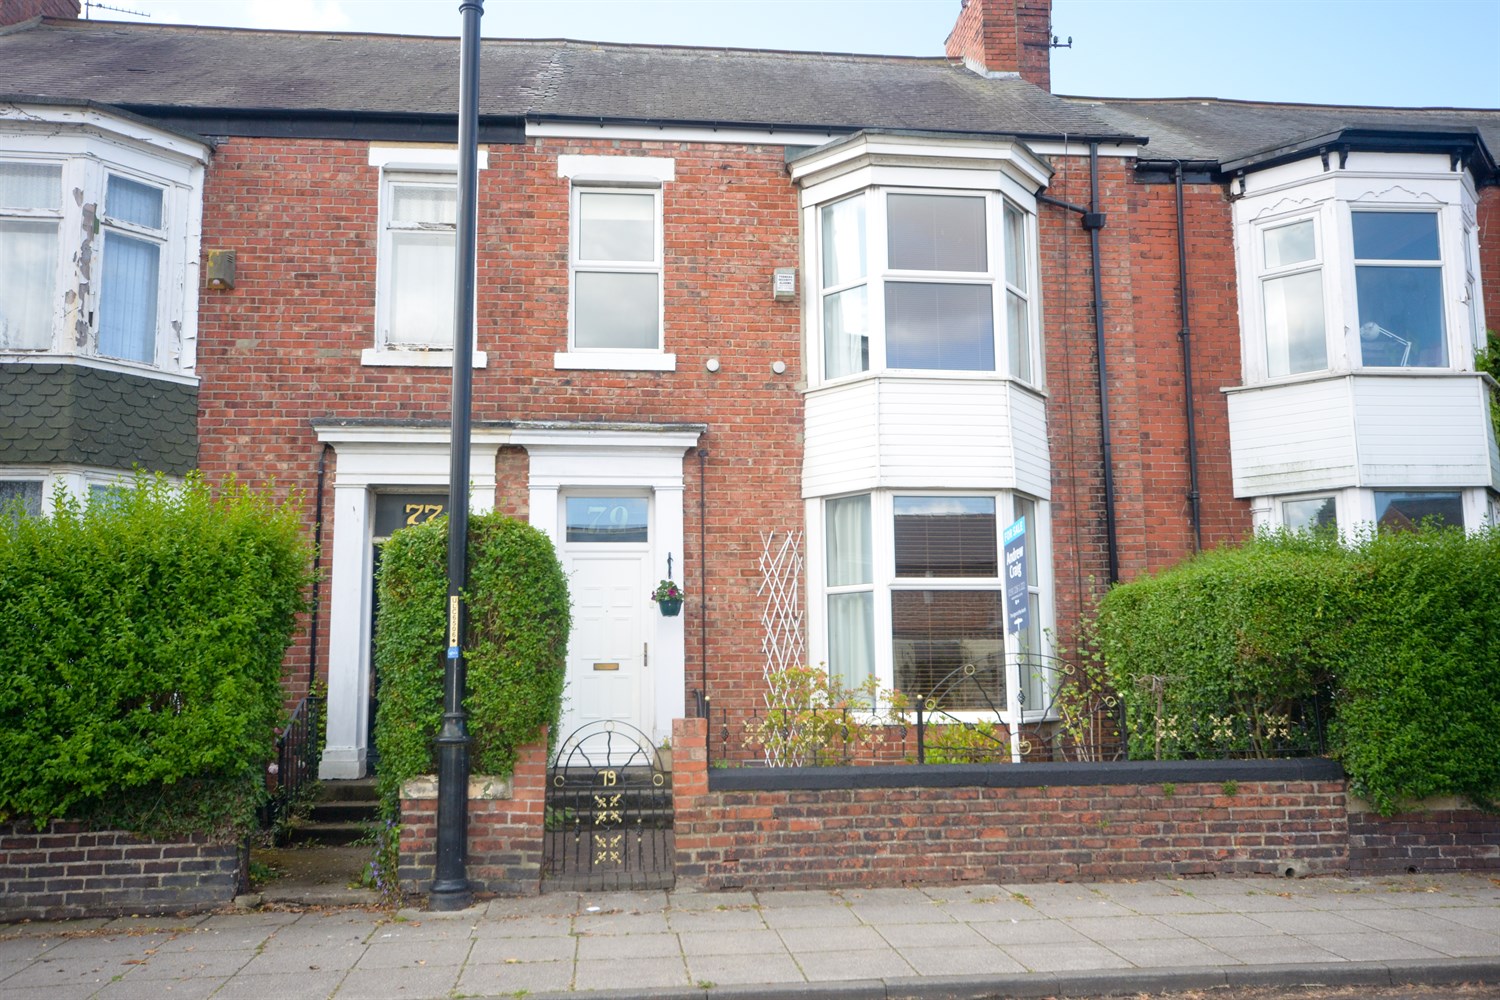 4 bed house for sale in Front Street, East Boldon - Property Image 1